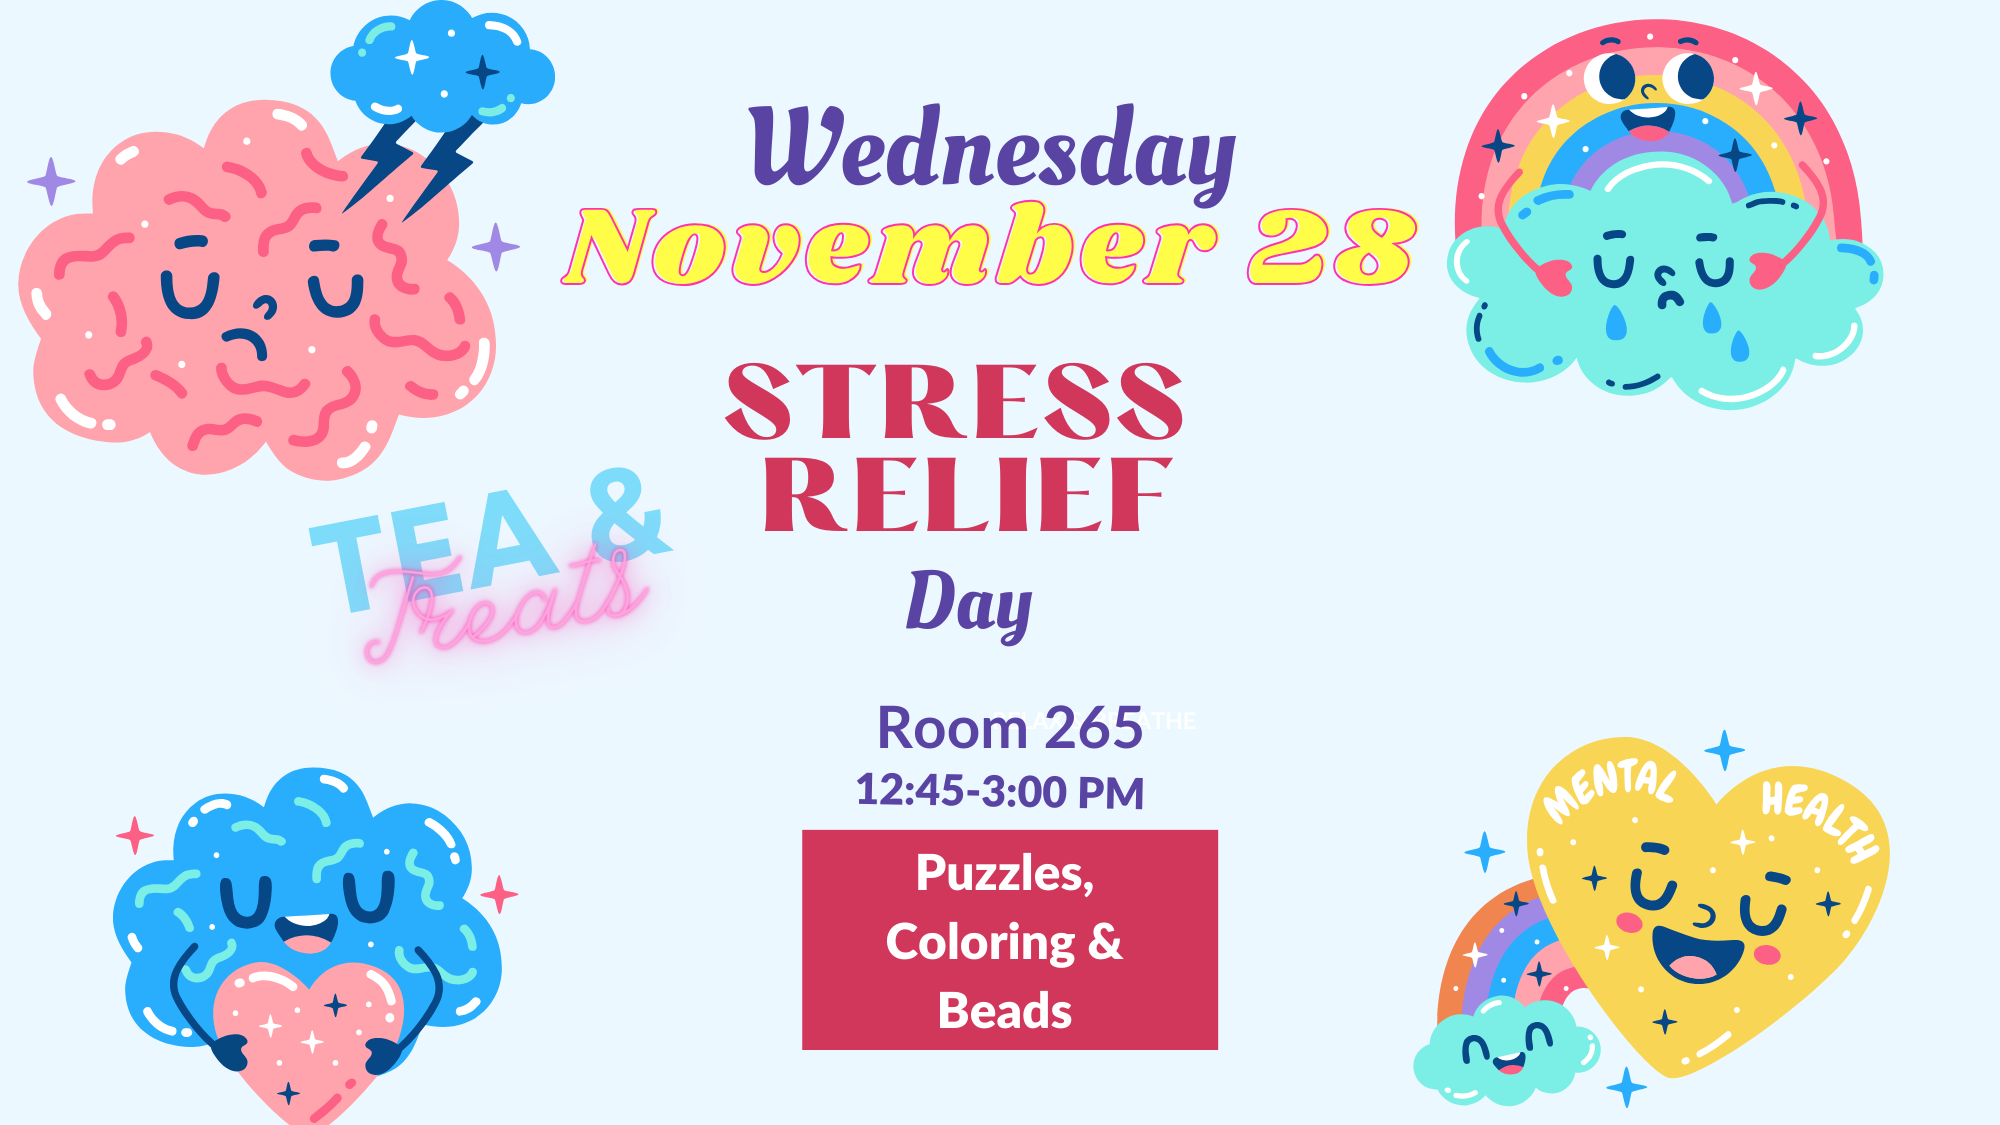 Wednesday November 29. Stress Relief Day. In BLB 265, from 12:45pm to 3pm. Tea, treats, puzzles, coloring, and beads!